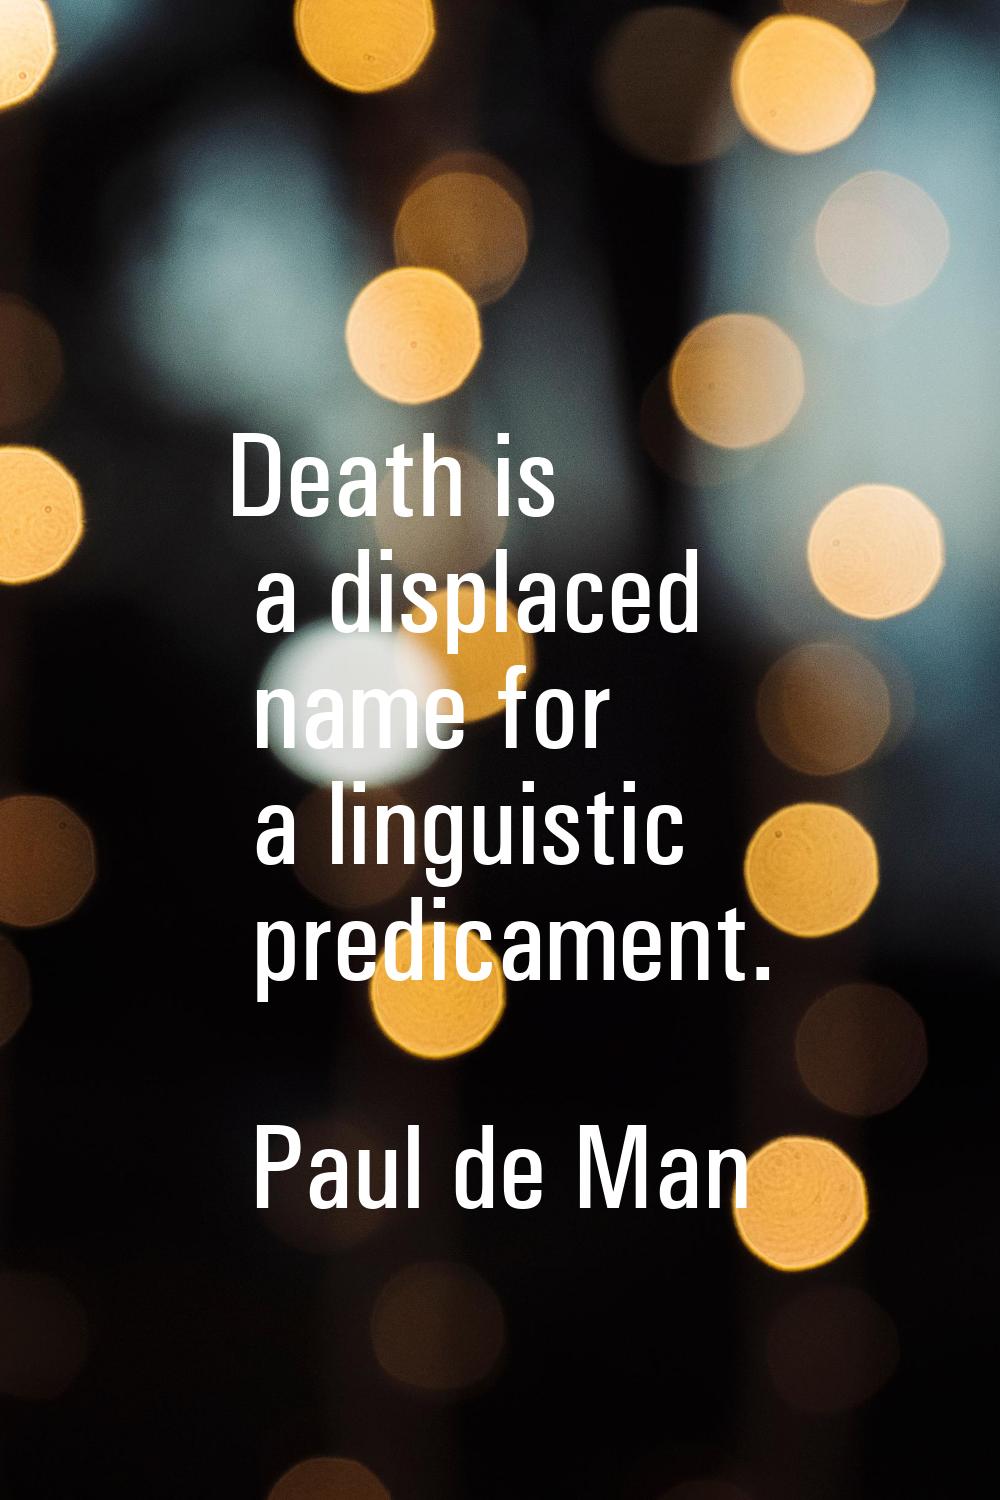 Death is a displaced name for a linguistic predicament.